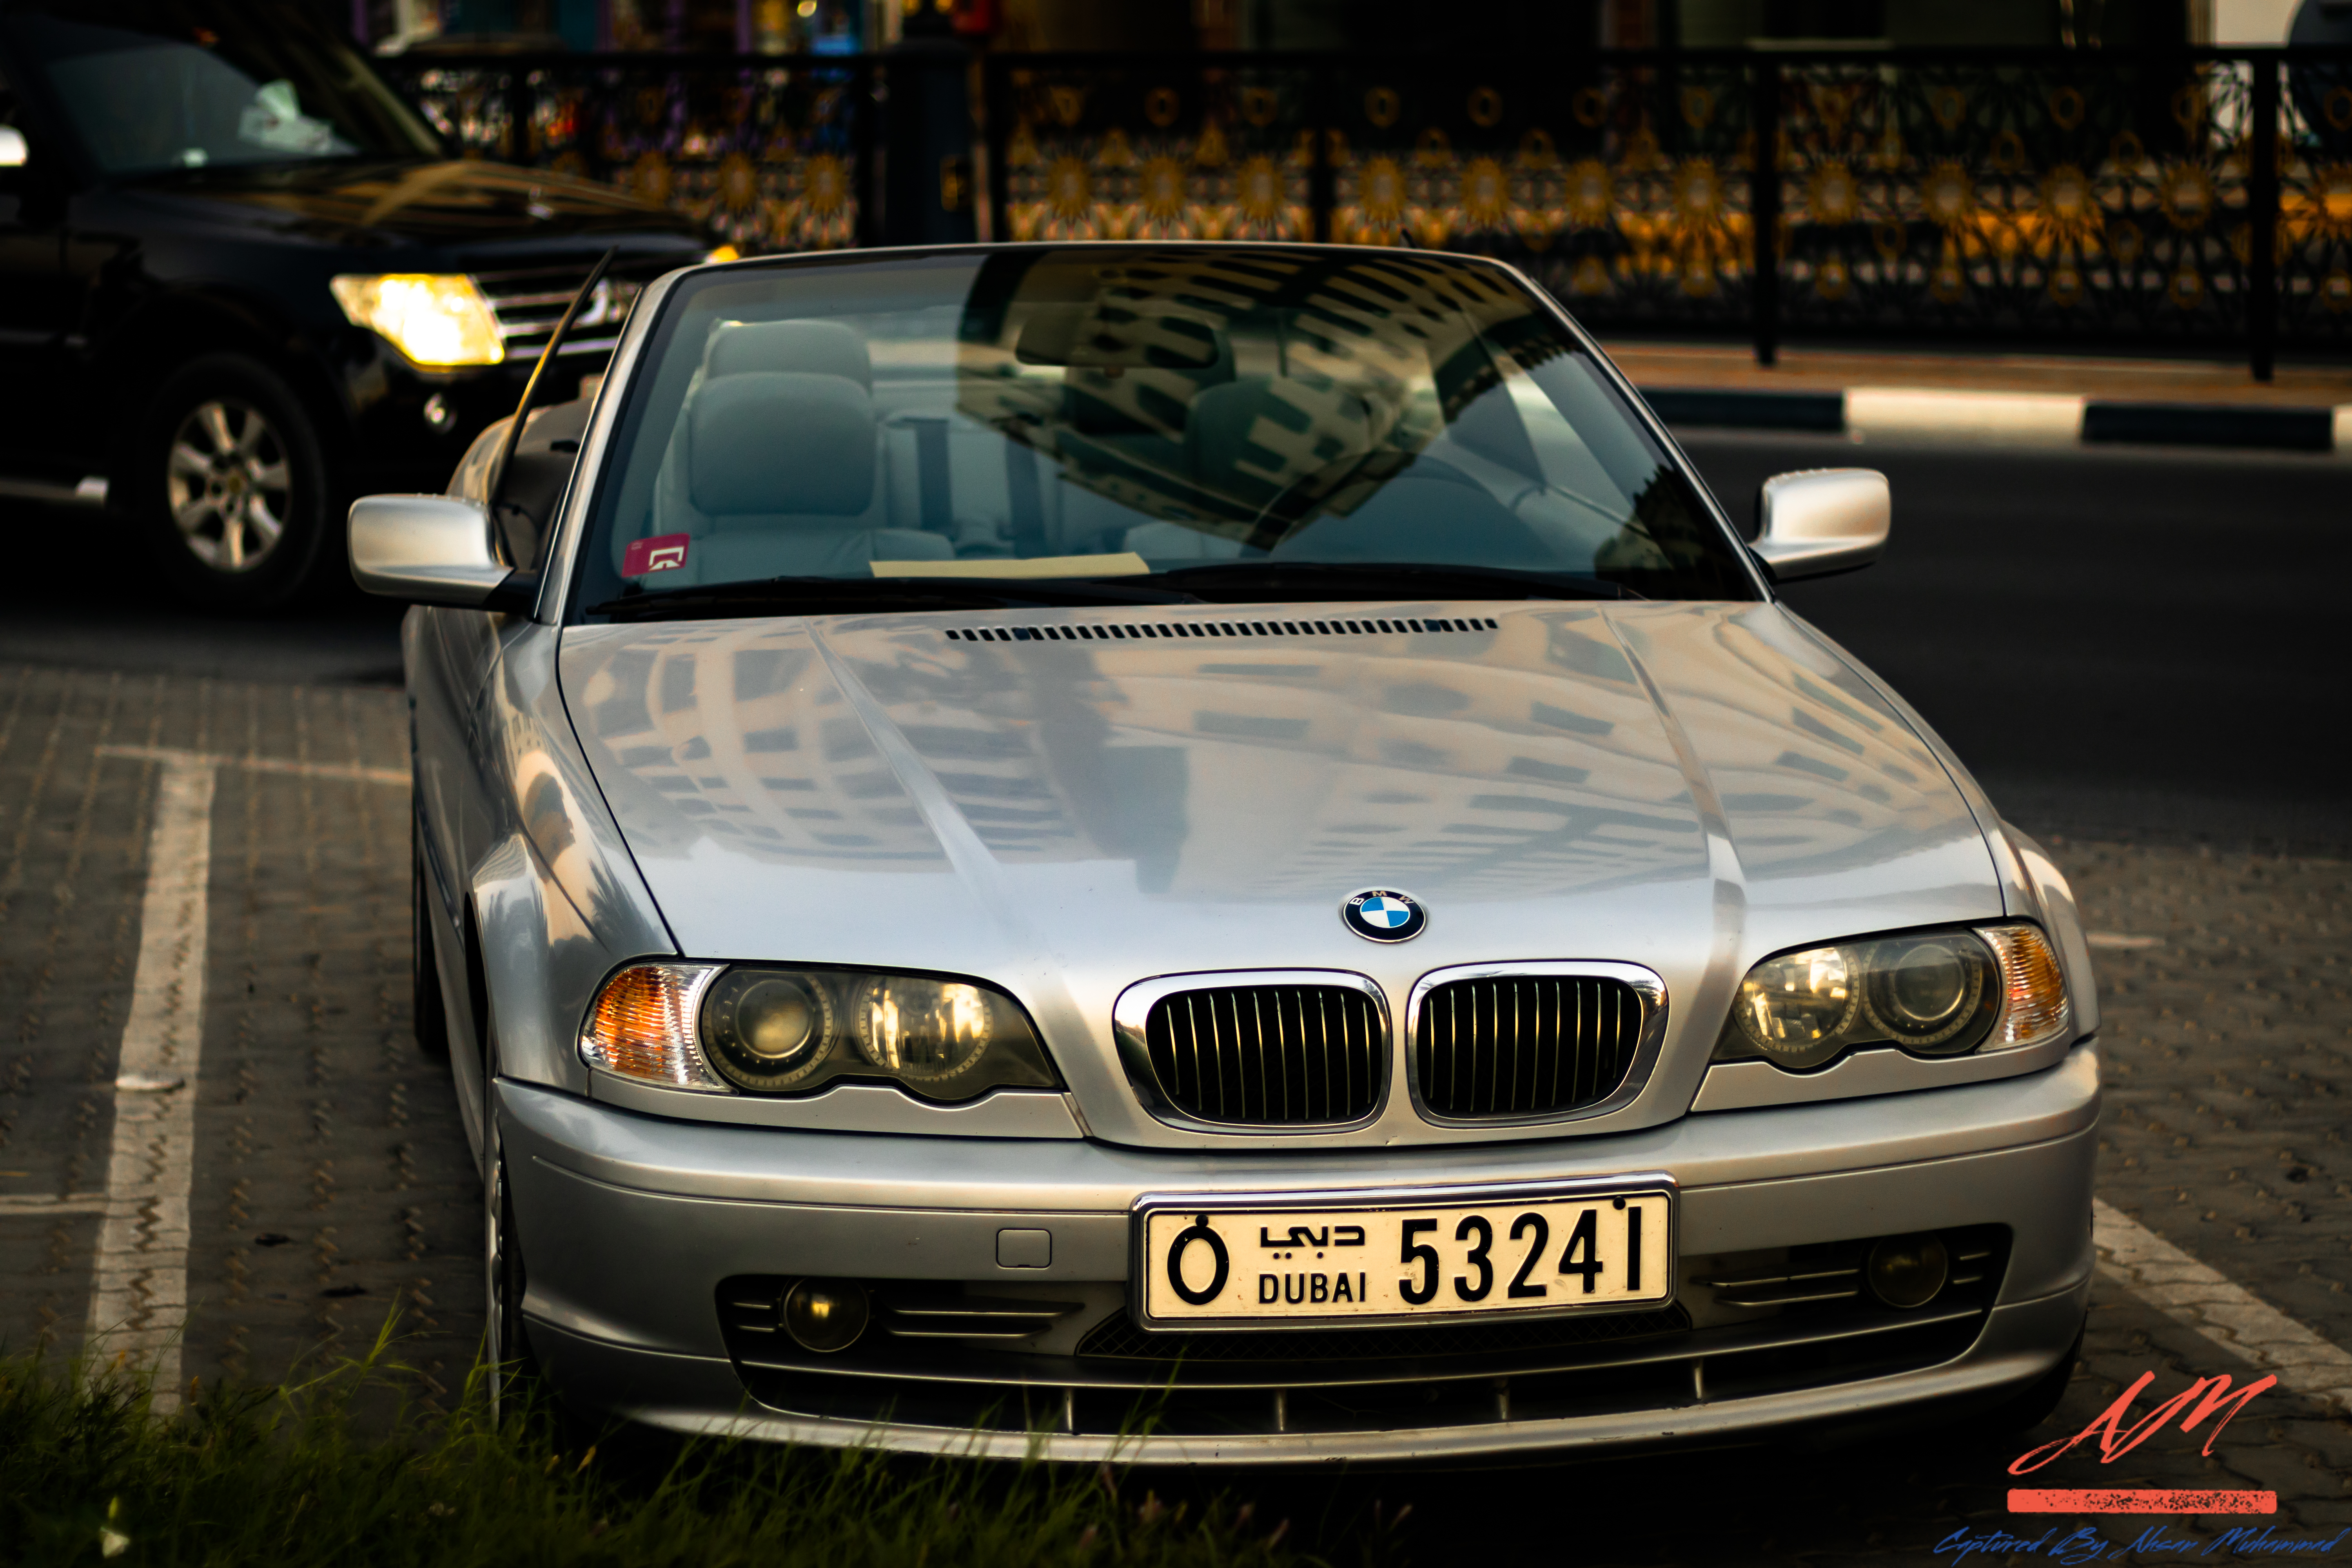 General 6000x4000 BMW E46 BMW convertible coupe silver cars German cars frontal view licence plates parking lot vehicle car headlights reflection signature grass